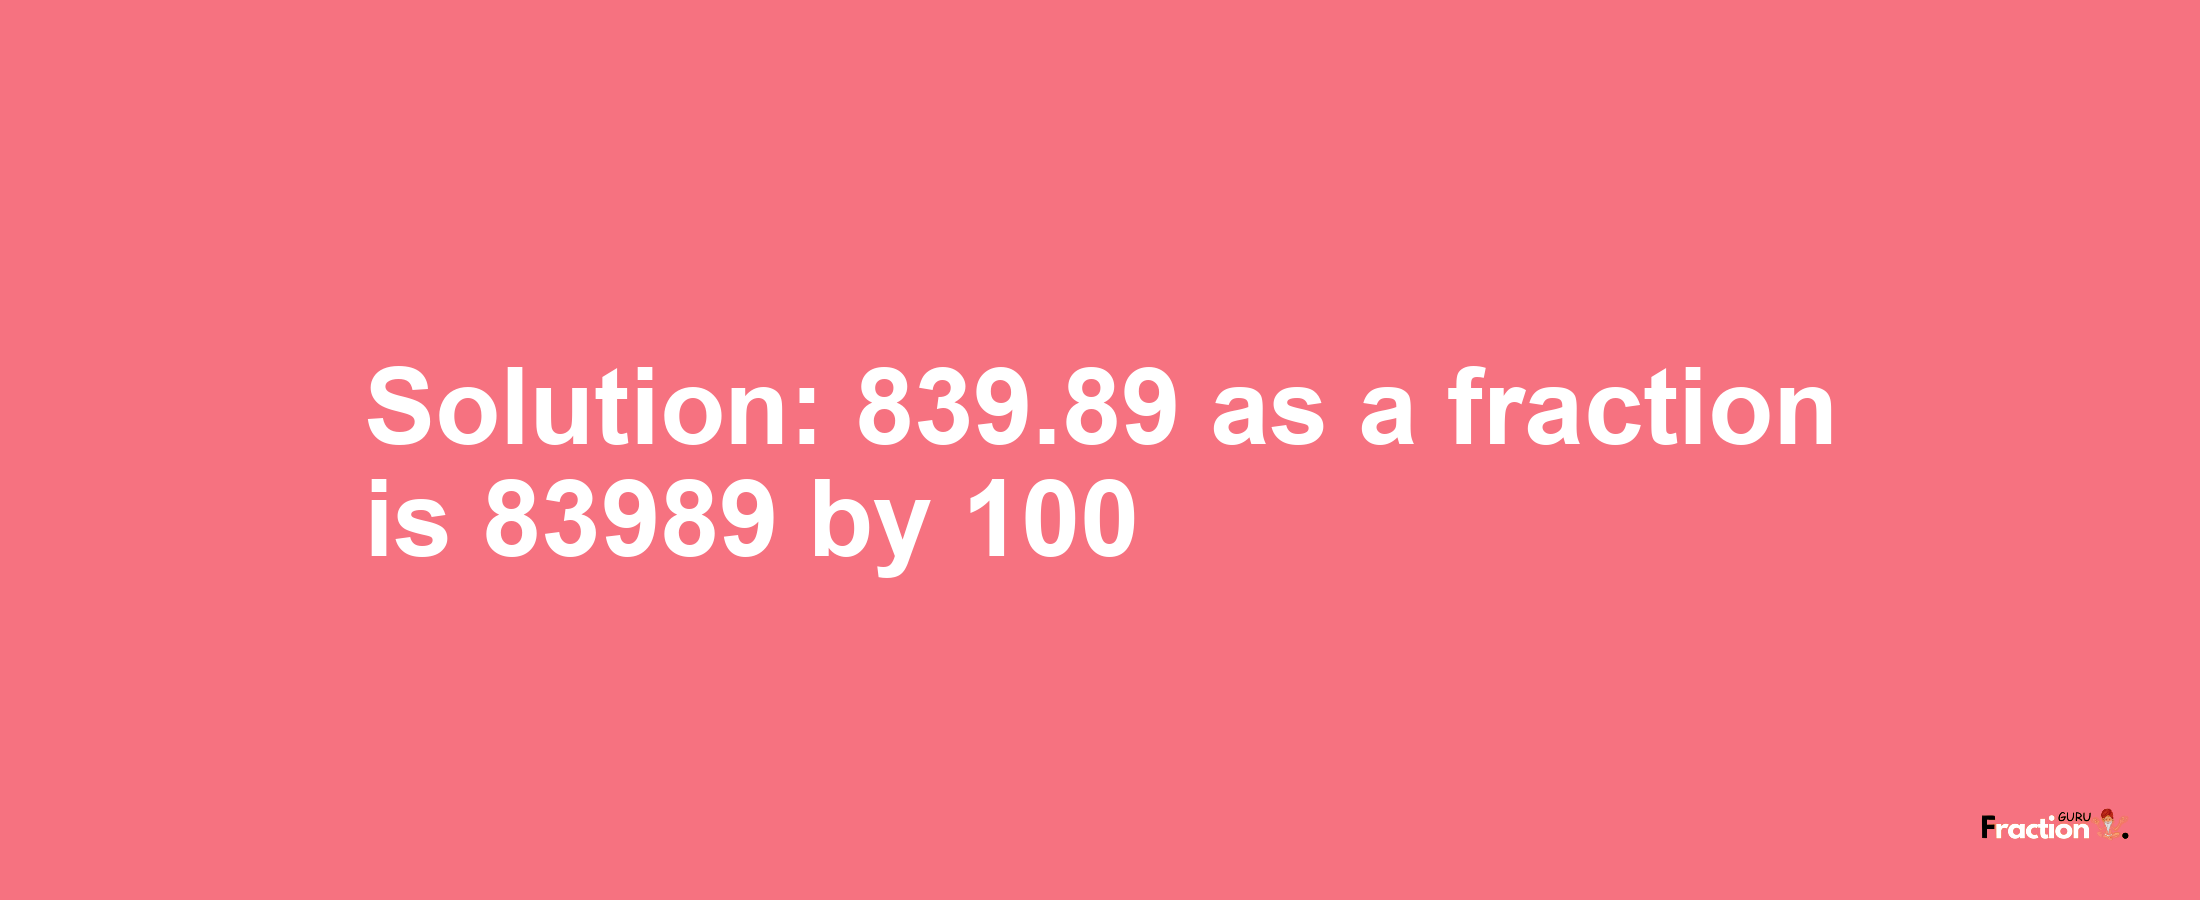 Solution:839.89 as a fraction is 83989/100